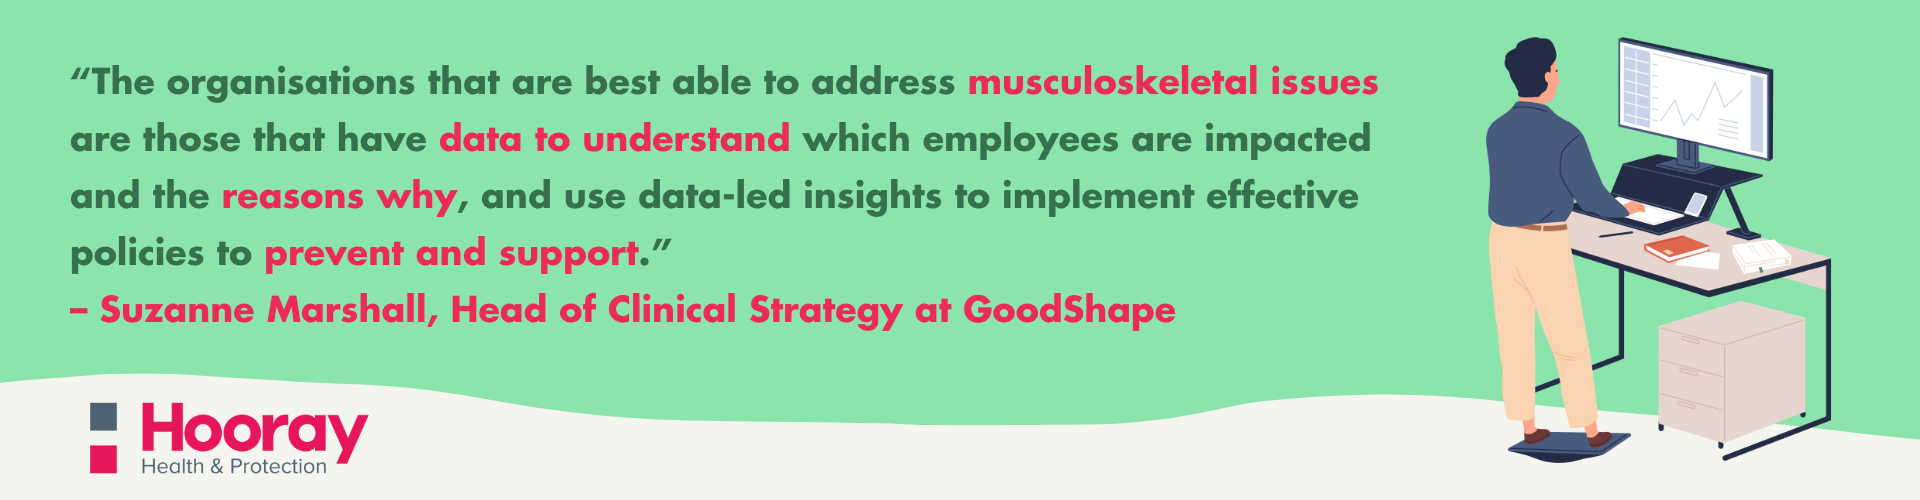 musculoskeletal health in the workplace: "Those organisations that are best able to address musculoskeletal issues are those that have data to understand which employees are impacted and the reasons why". Suzanne Marshall, Head of Clinical Strategy at GoodShape